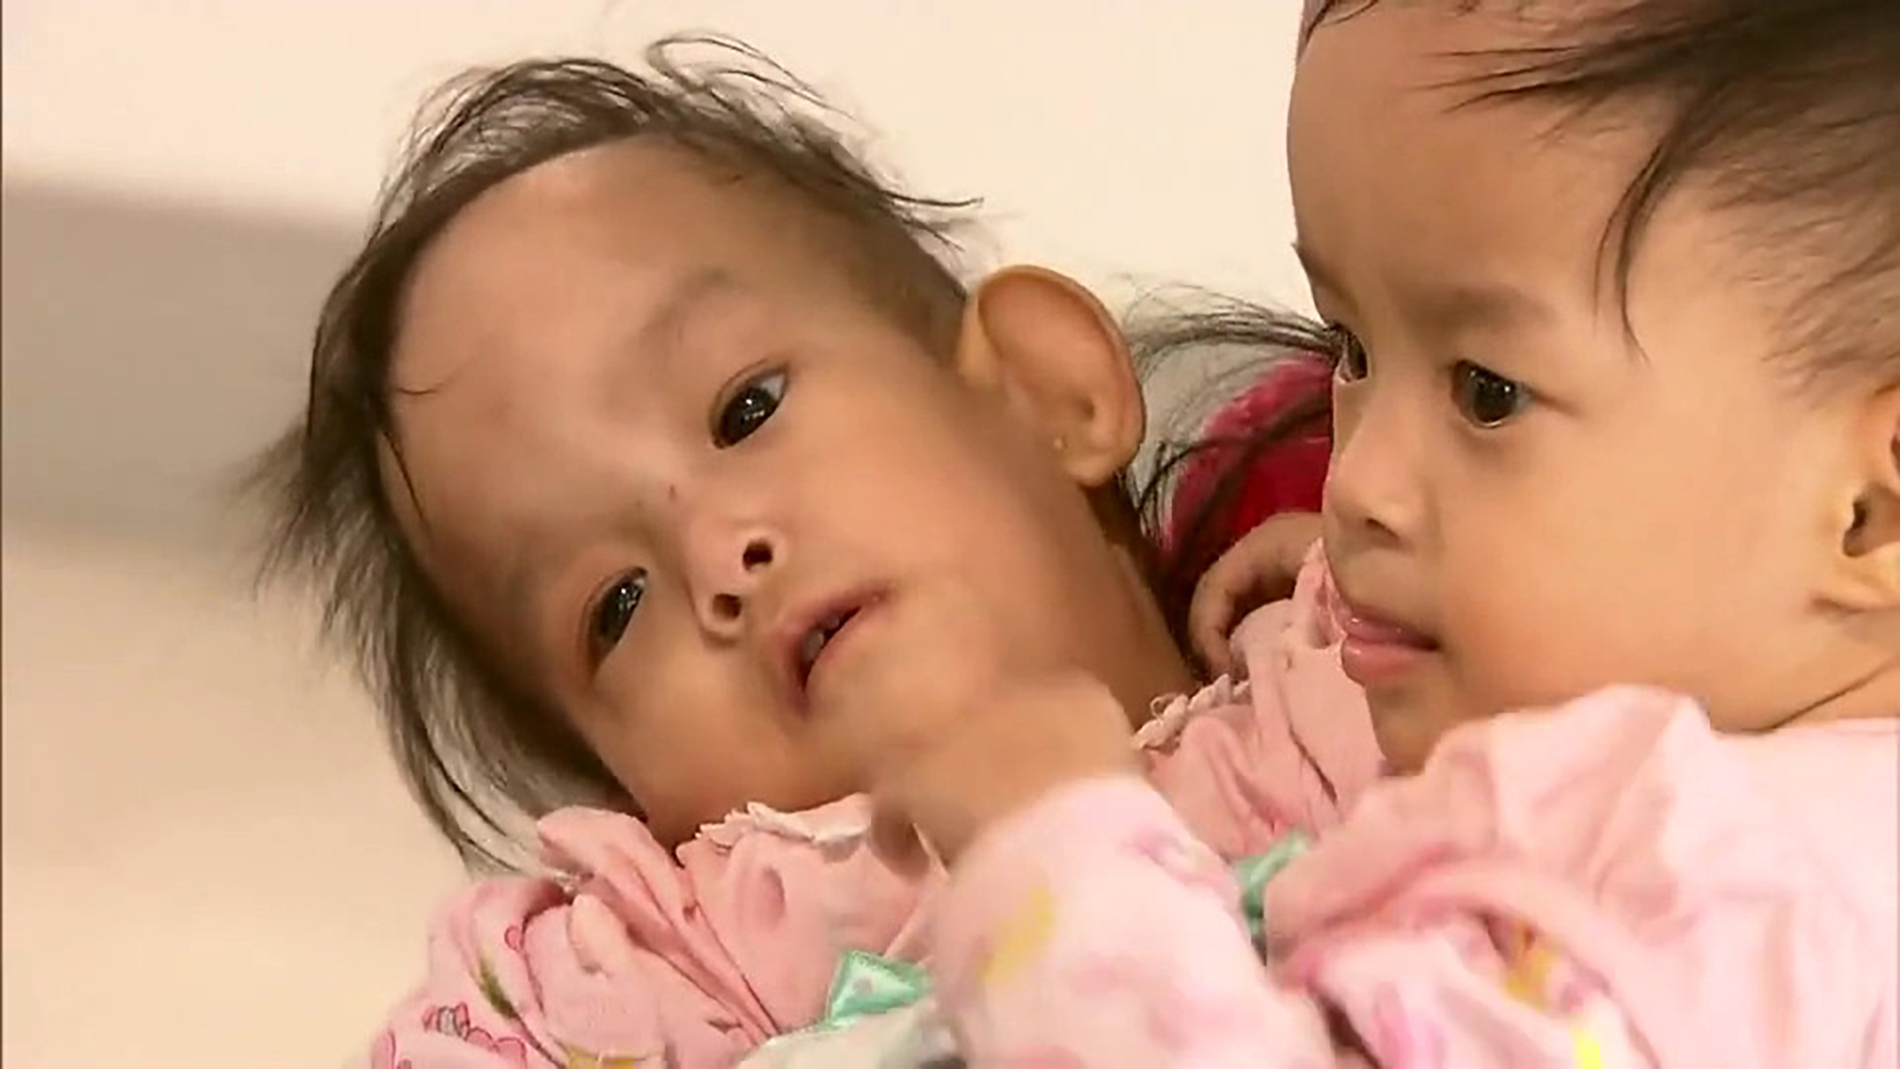 Conjoined Twins Bhutanese Girls Separated After Six Hour Surgery In Australia Cnn